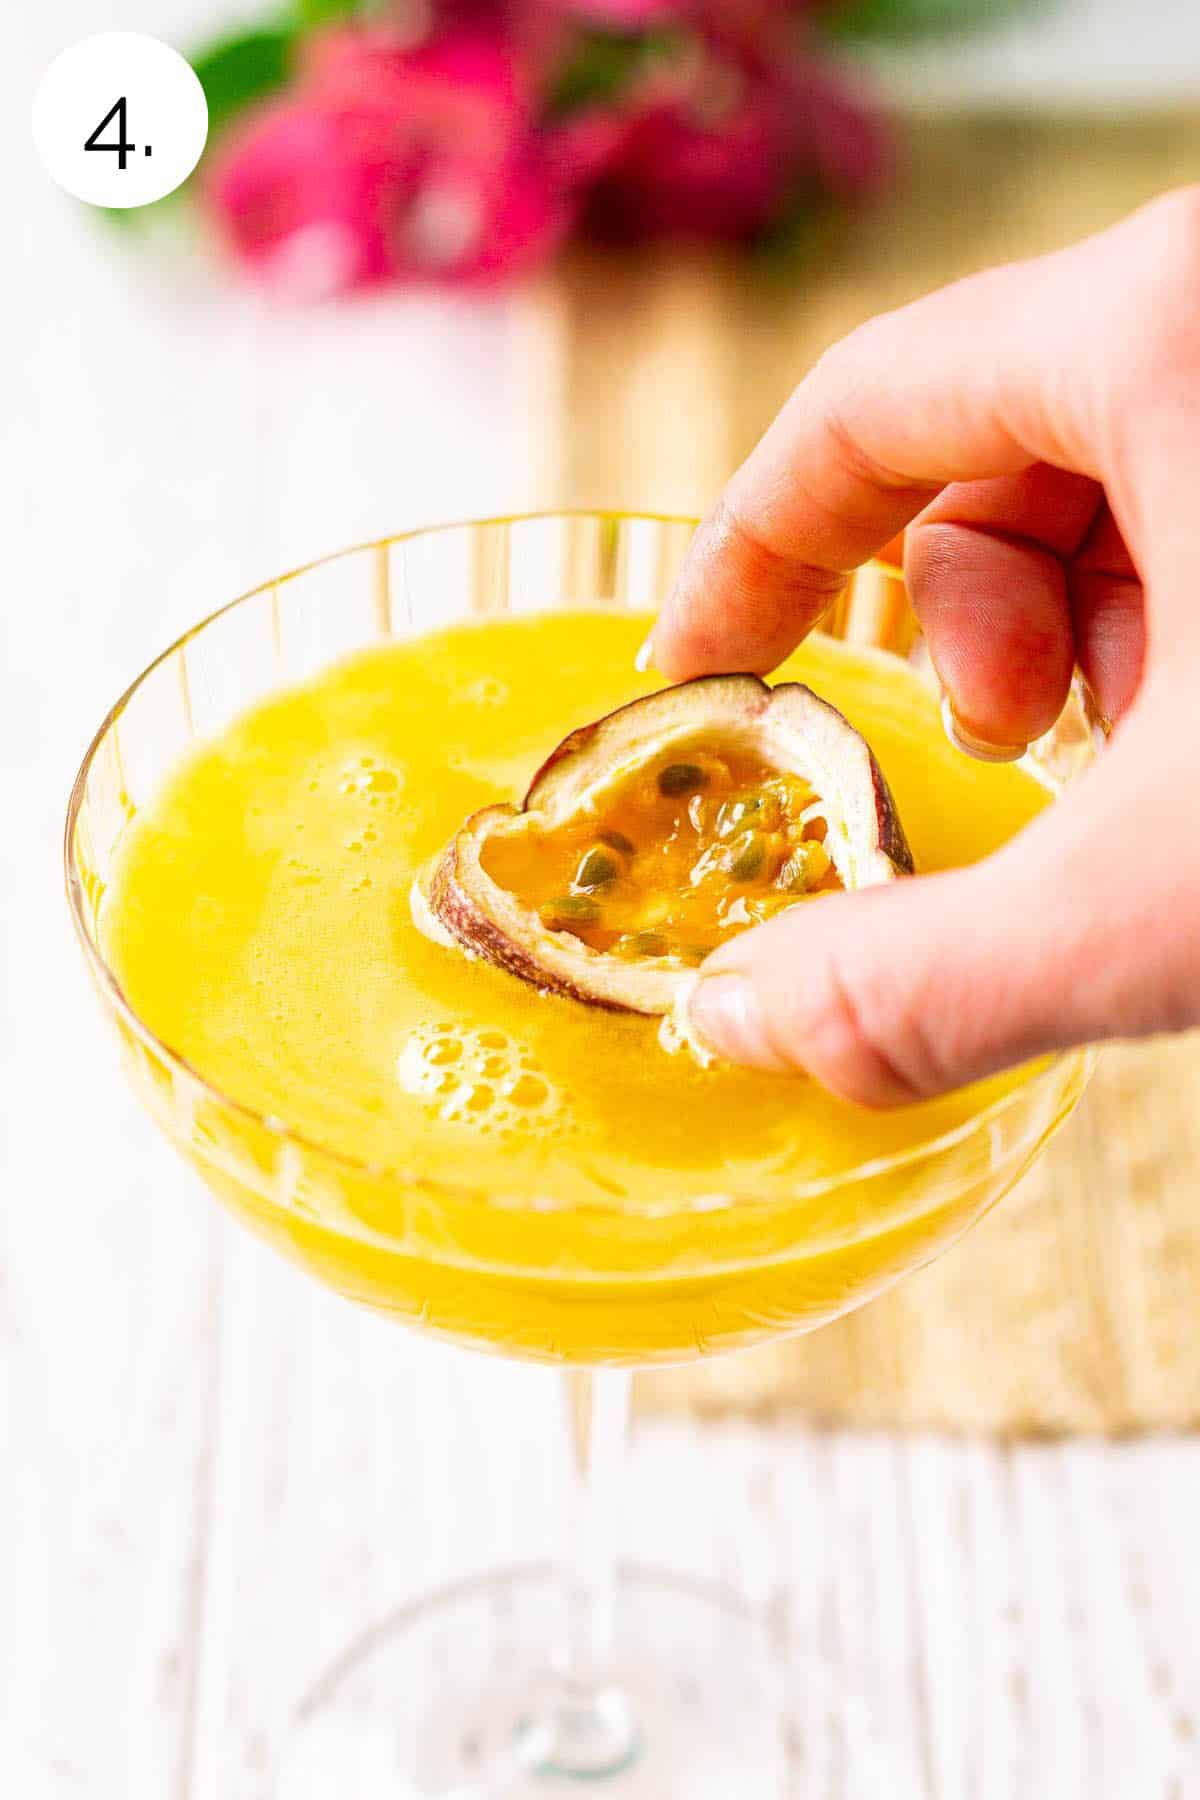 A hand placing a slice of fresh passion fruit on top of the drink to float in the martini glass.